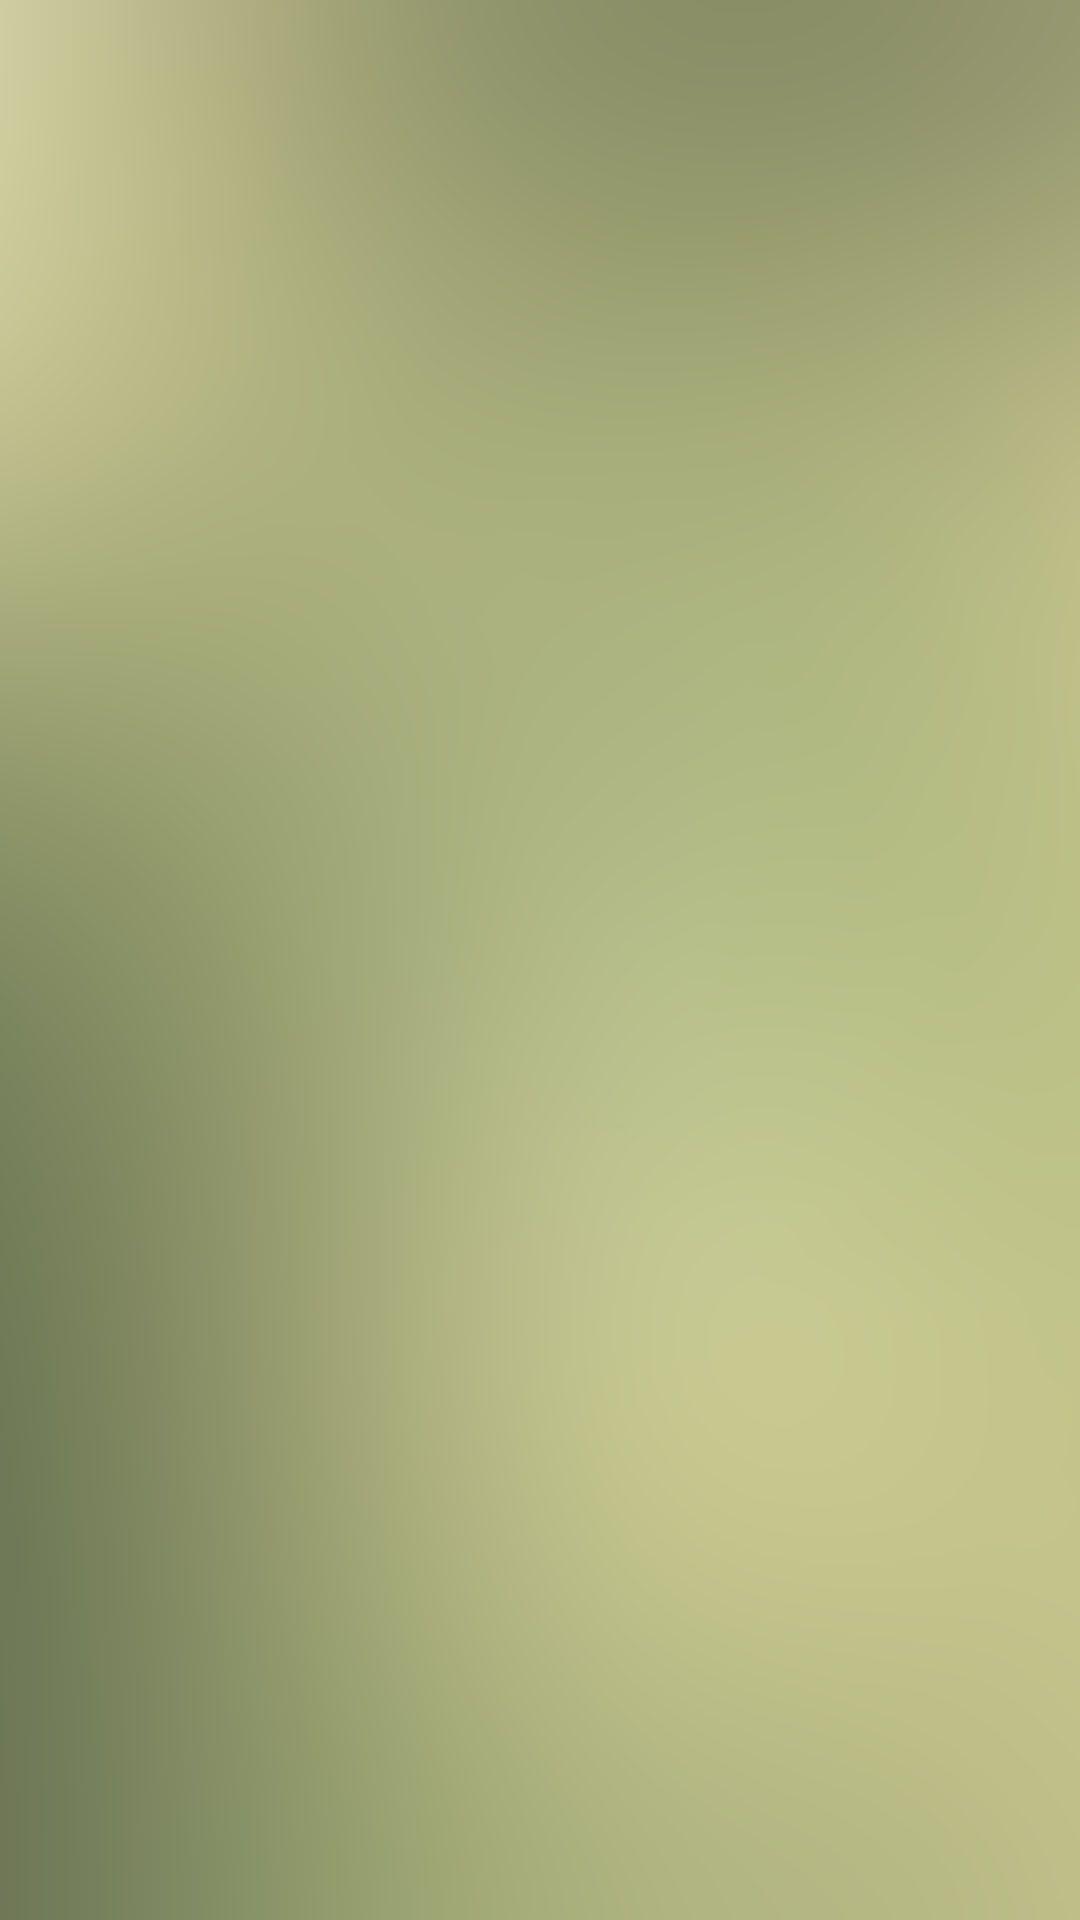 Nature Light Green Gradient Android Wallpaper free download